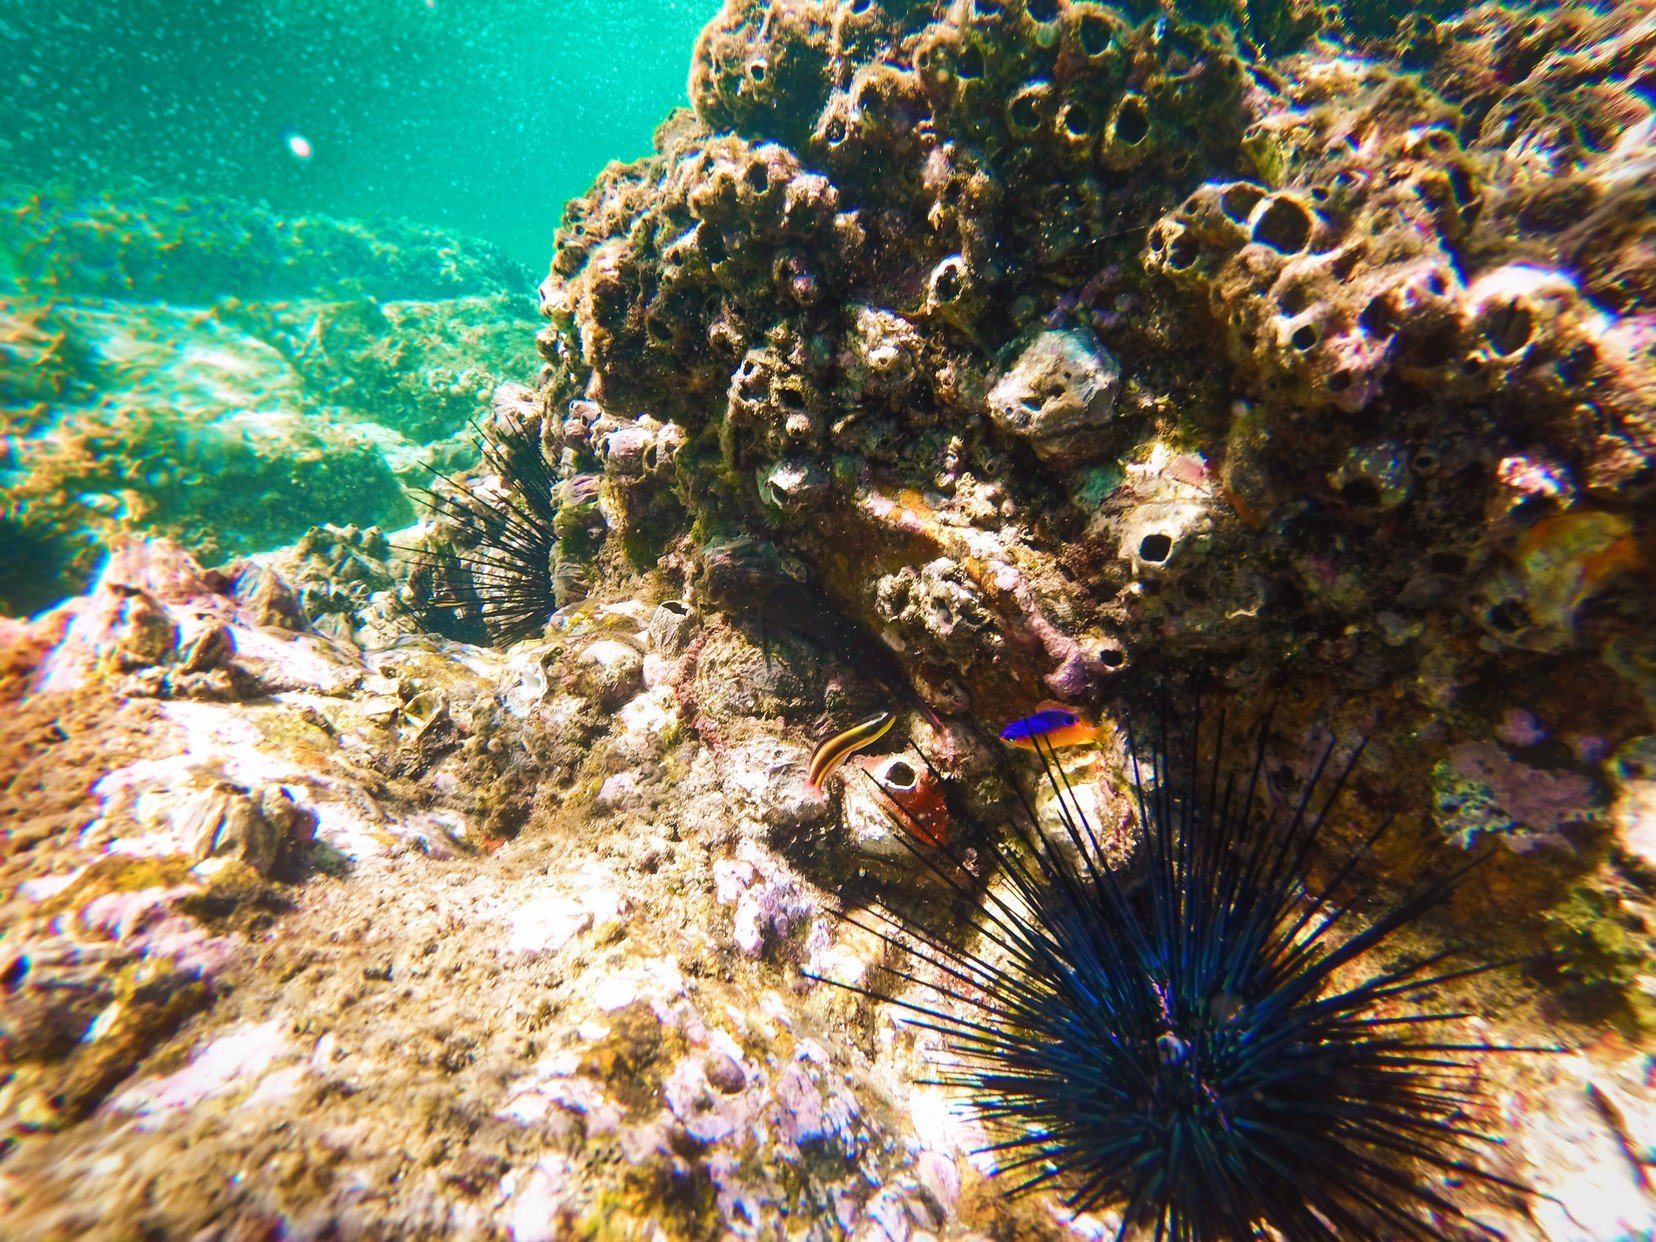 Colorful-urchins-while-snorkeling-in-Cabo-San-Lucas-4.jpg